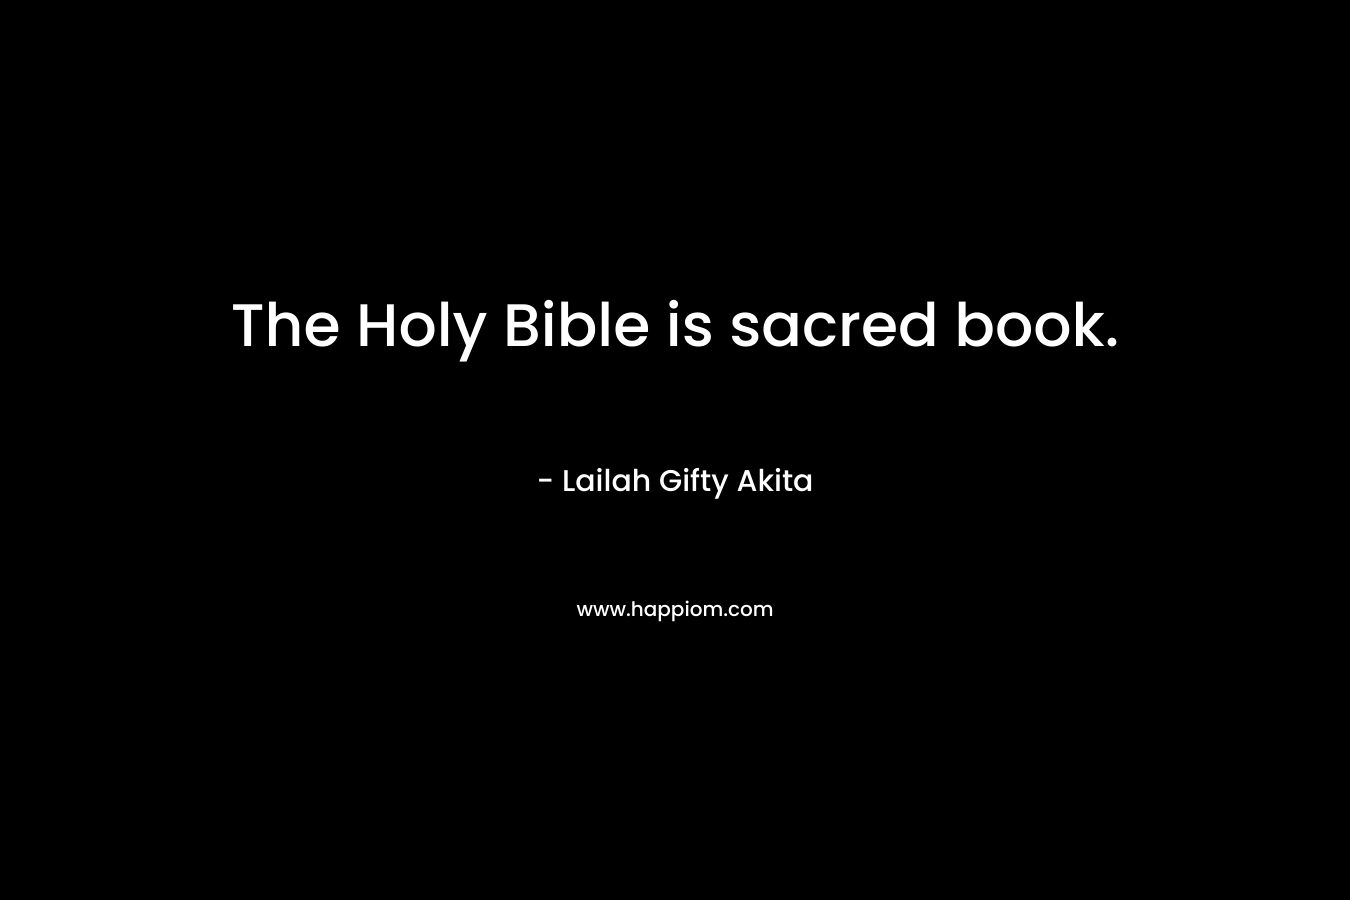 The Holy Bible is sacred book.